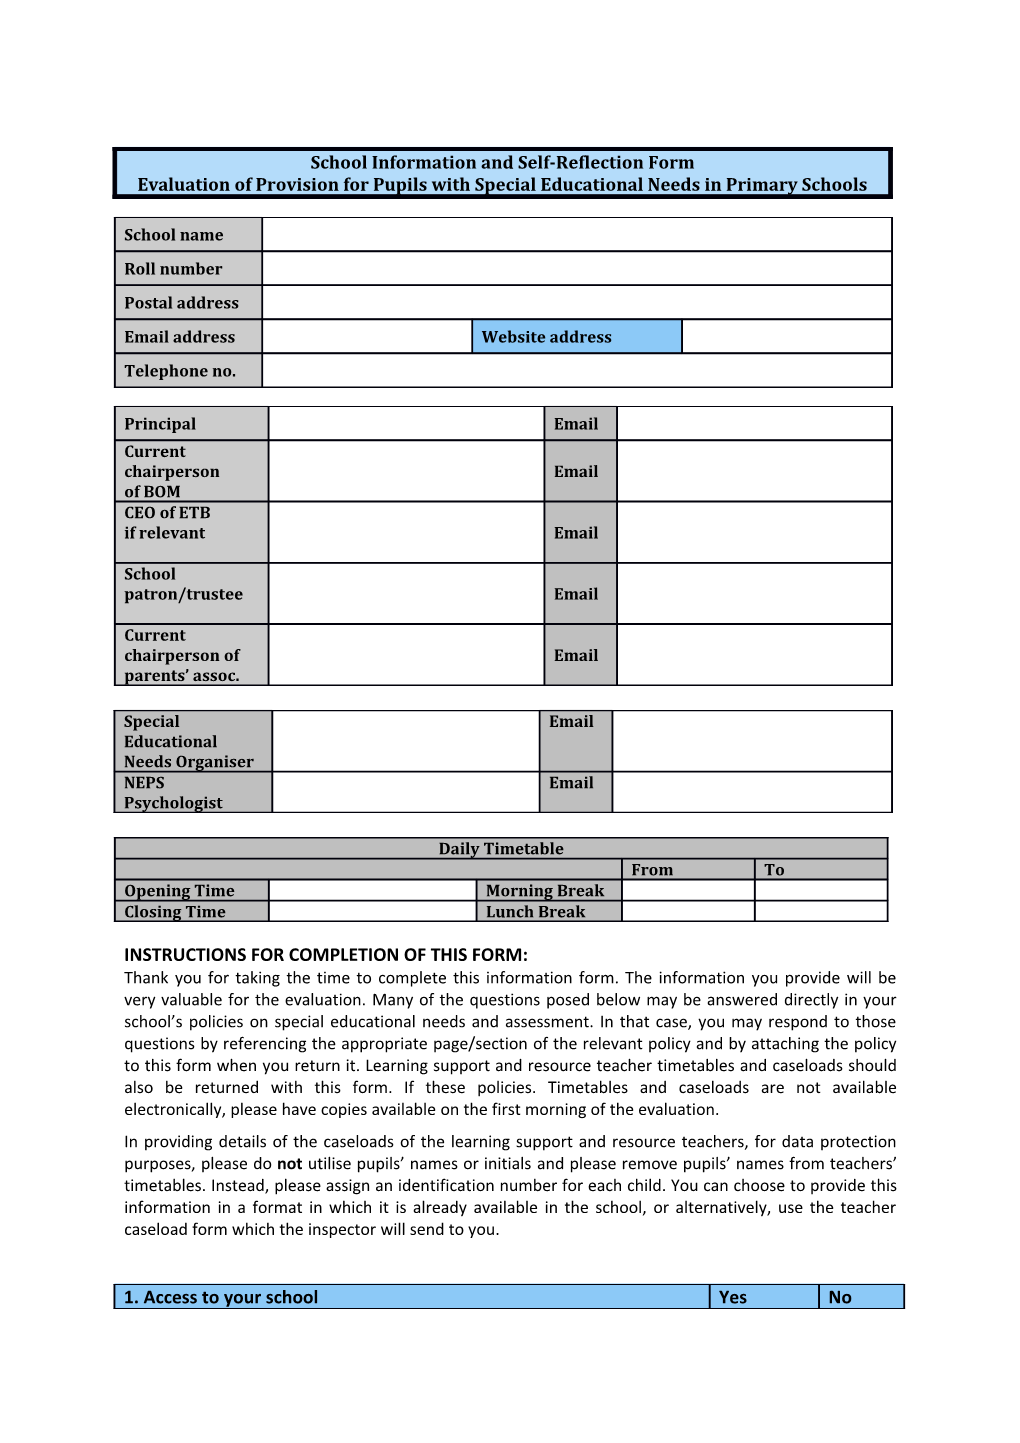 Instructions for Completion of This Form